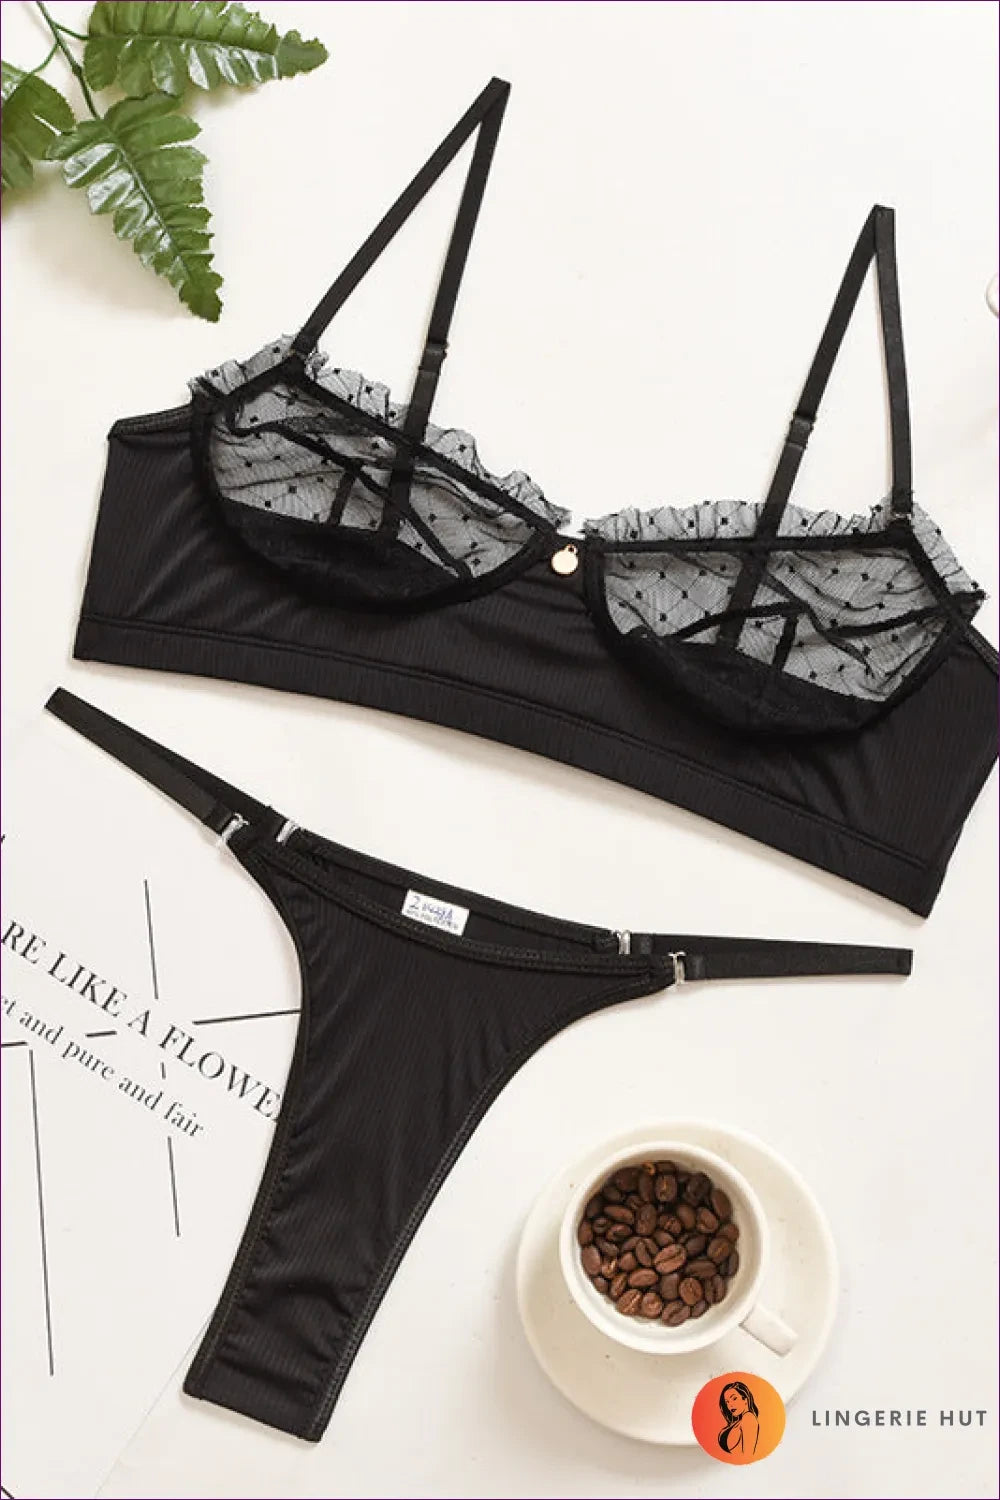 Turn Up The Heat With Our Eyelash Lace High Cut Bra Set From [brand Name]. Richly Textured Lace, Push-up Bra,